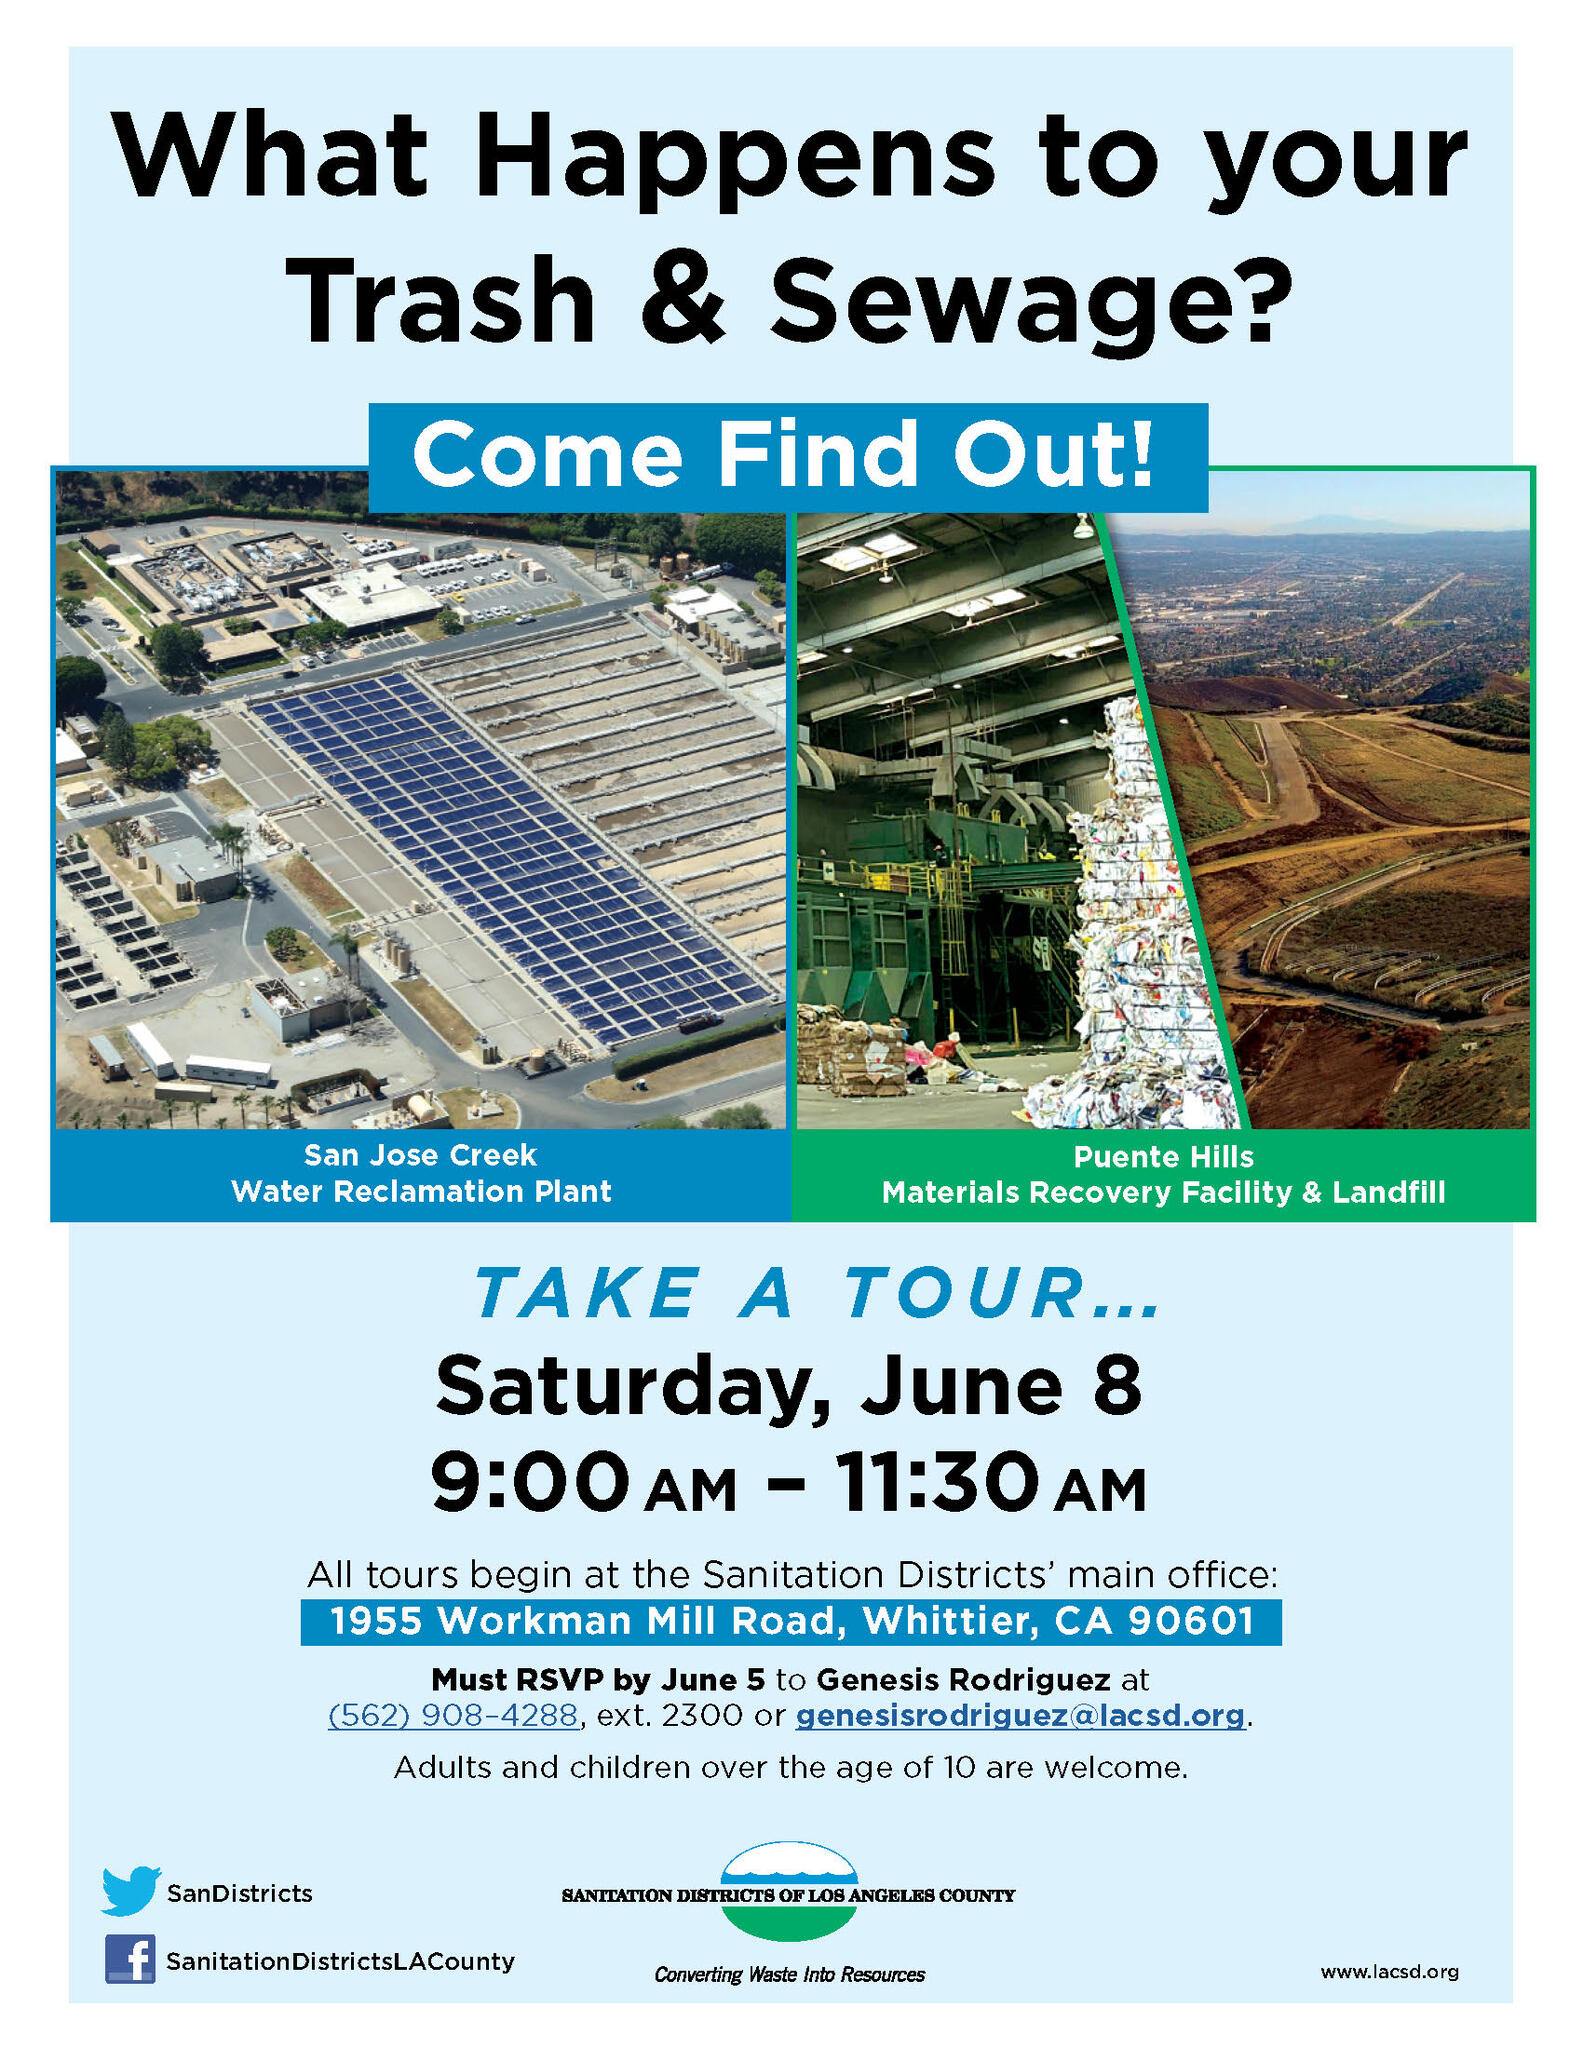 What Happens to Your Sewage and Trash? Free Tour of Sanitation Districts'  Facilities in Whitter on Saturday, June 8. (County of Los Angeles) —  Nextdoor — Nextdoor